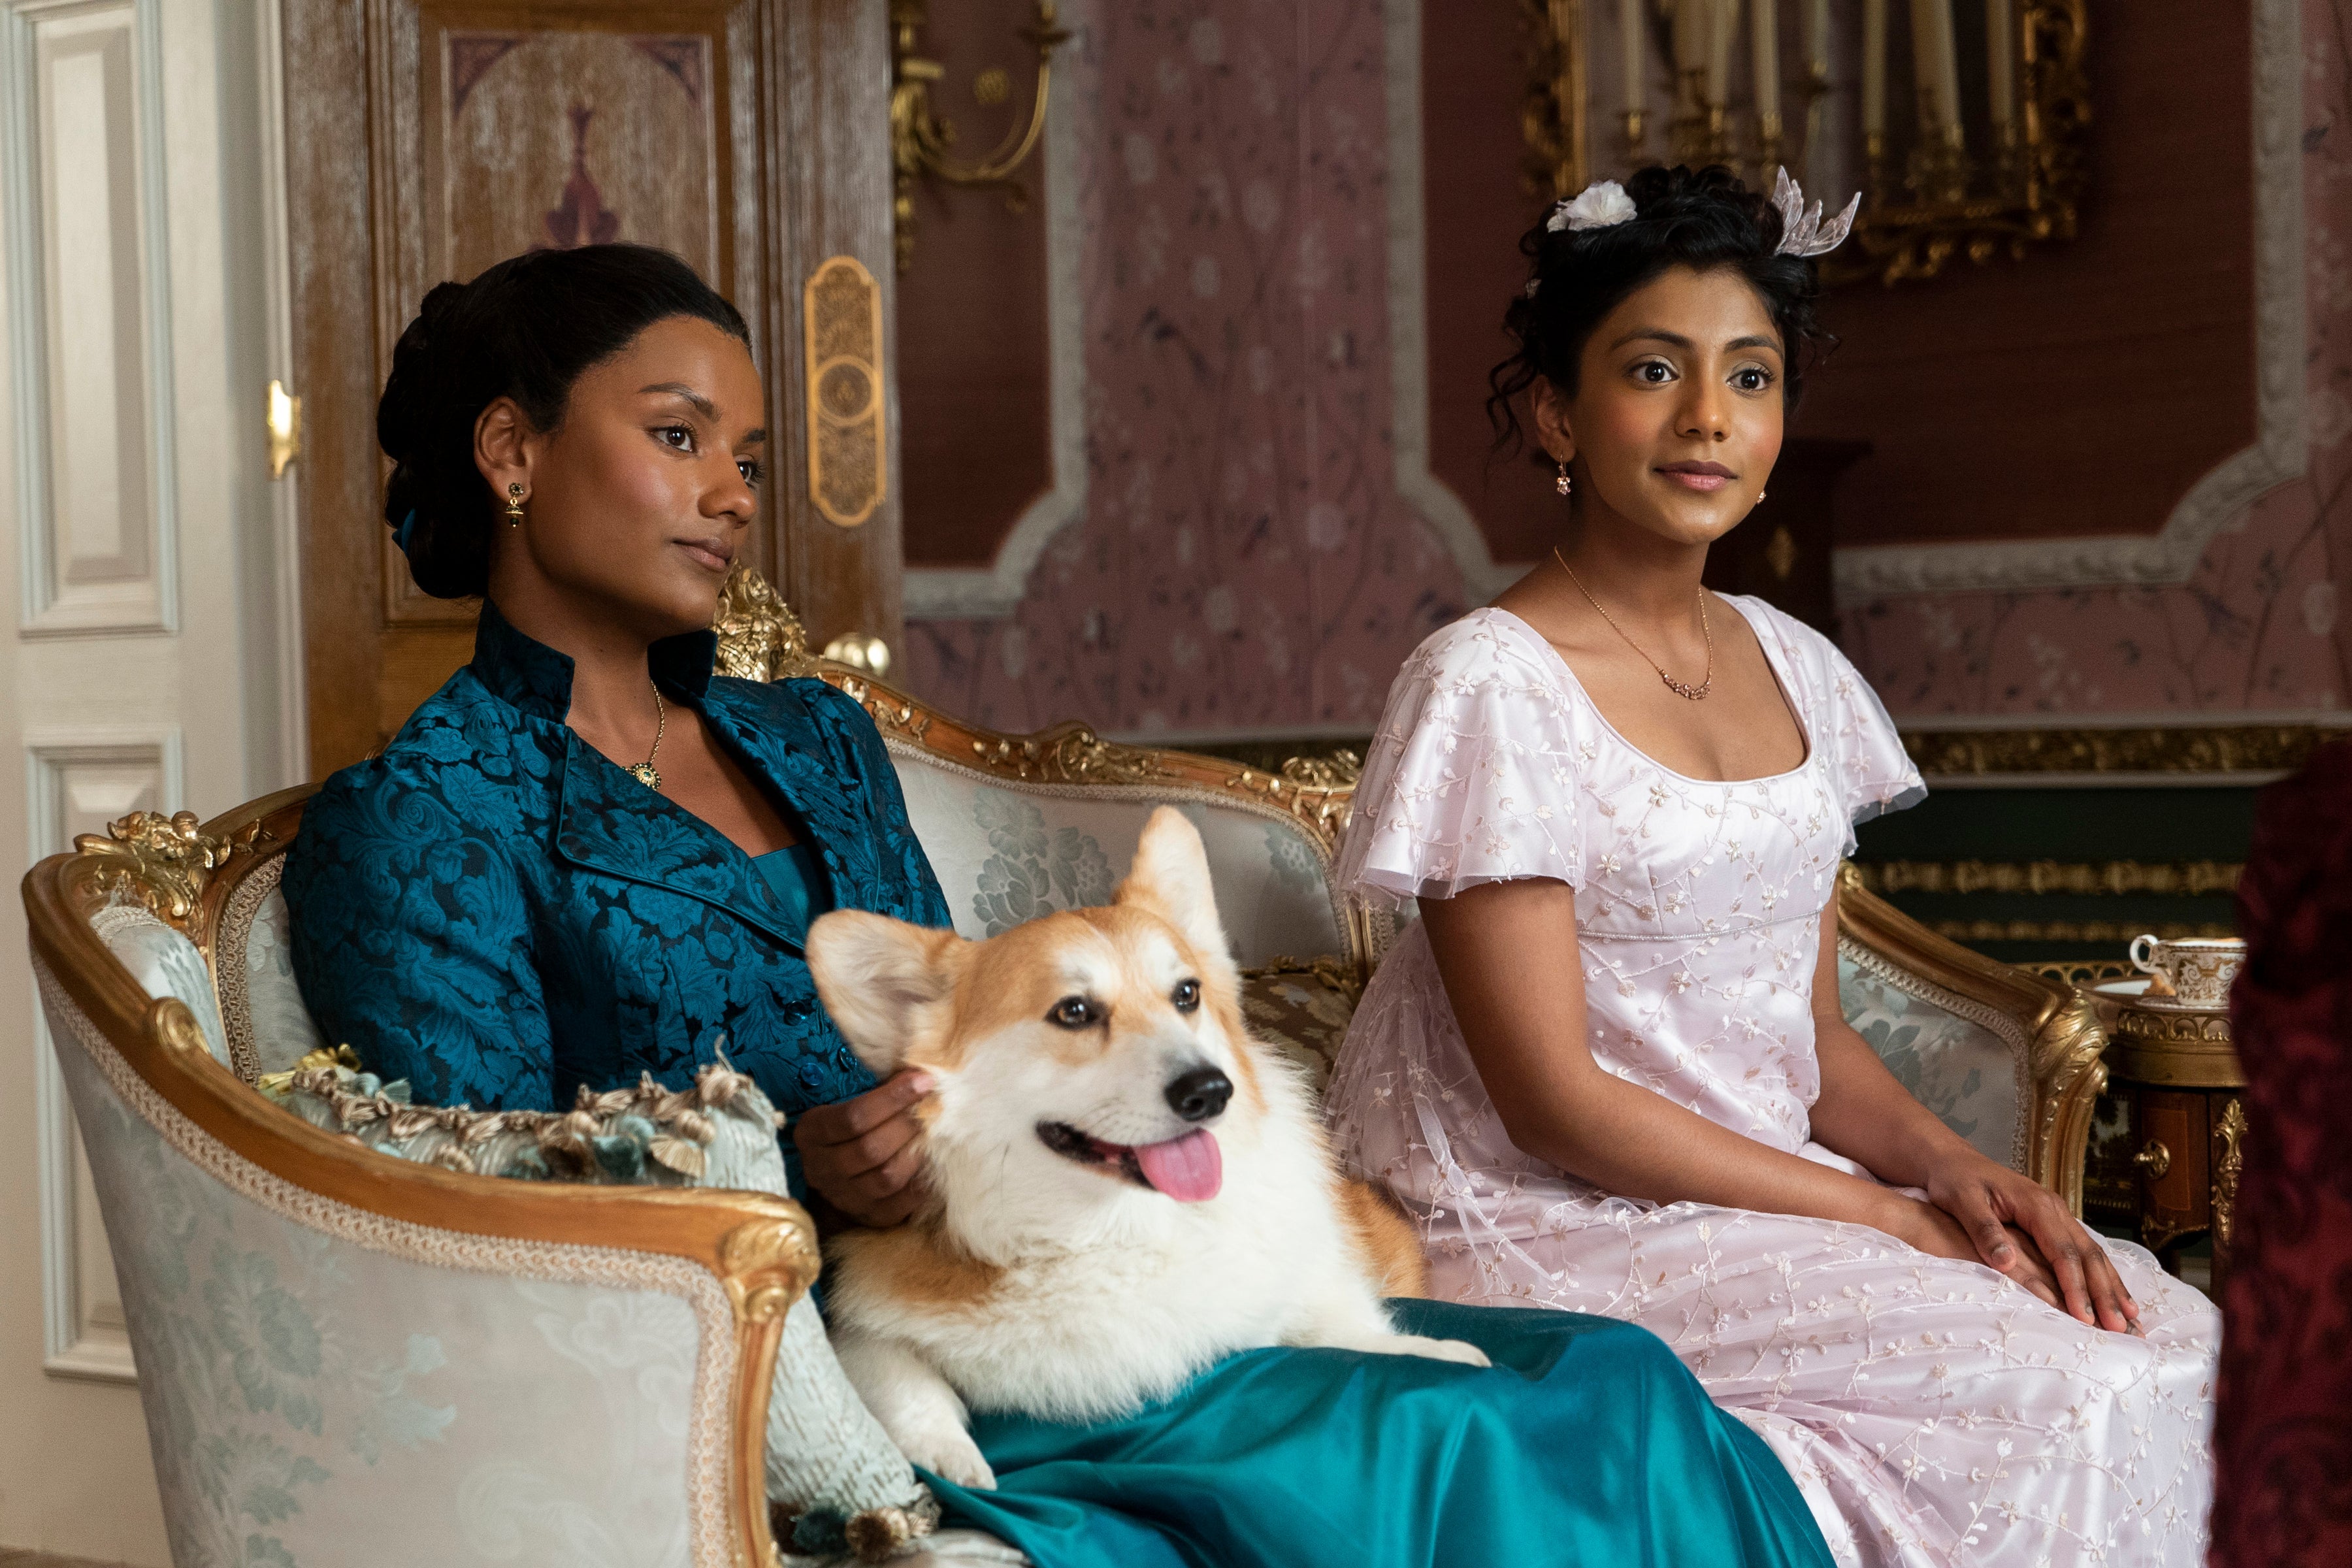 The Sharma sisters sitting with the dog Newton in Bridgerton